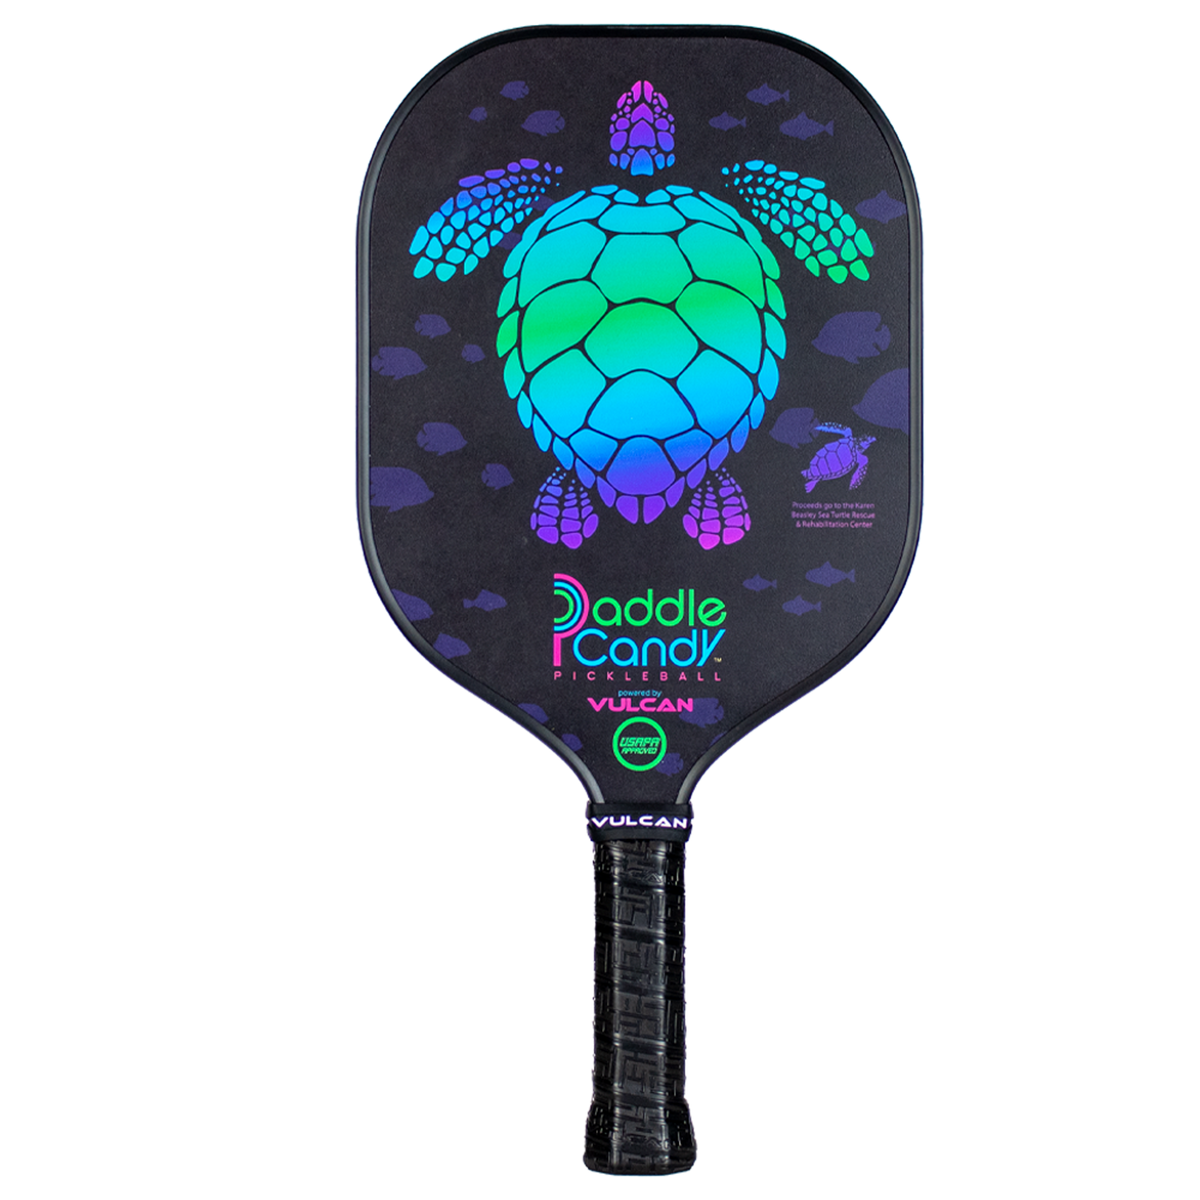 Paddle Candy "Turtle" Pickleball Paddle